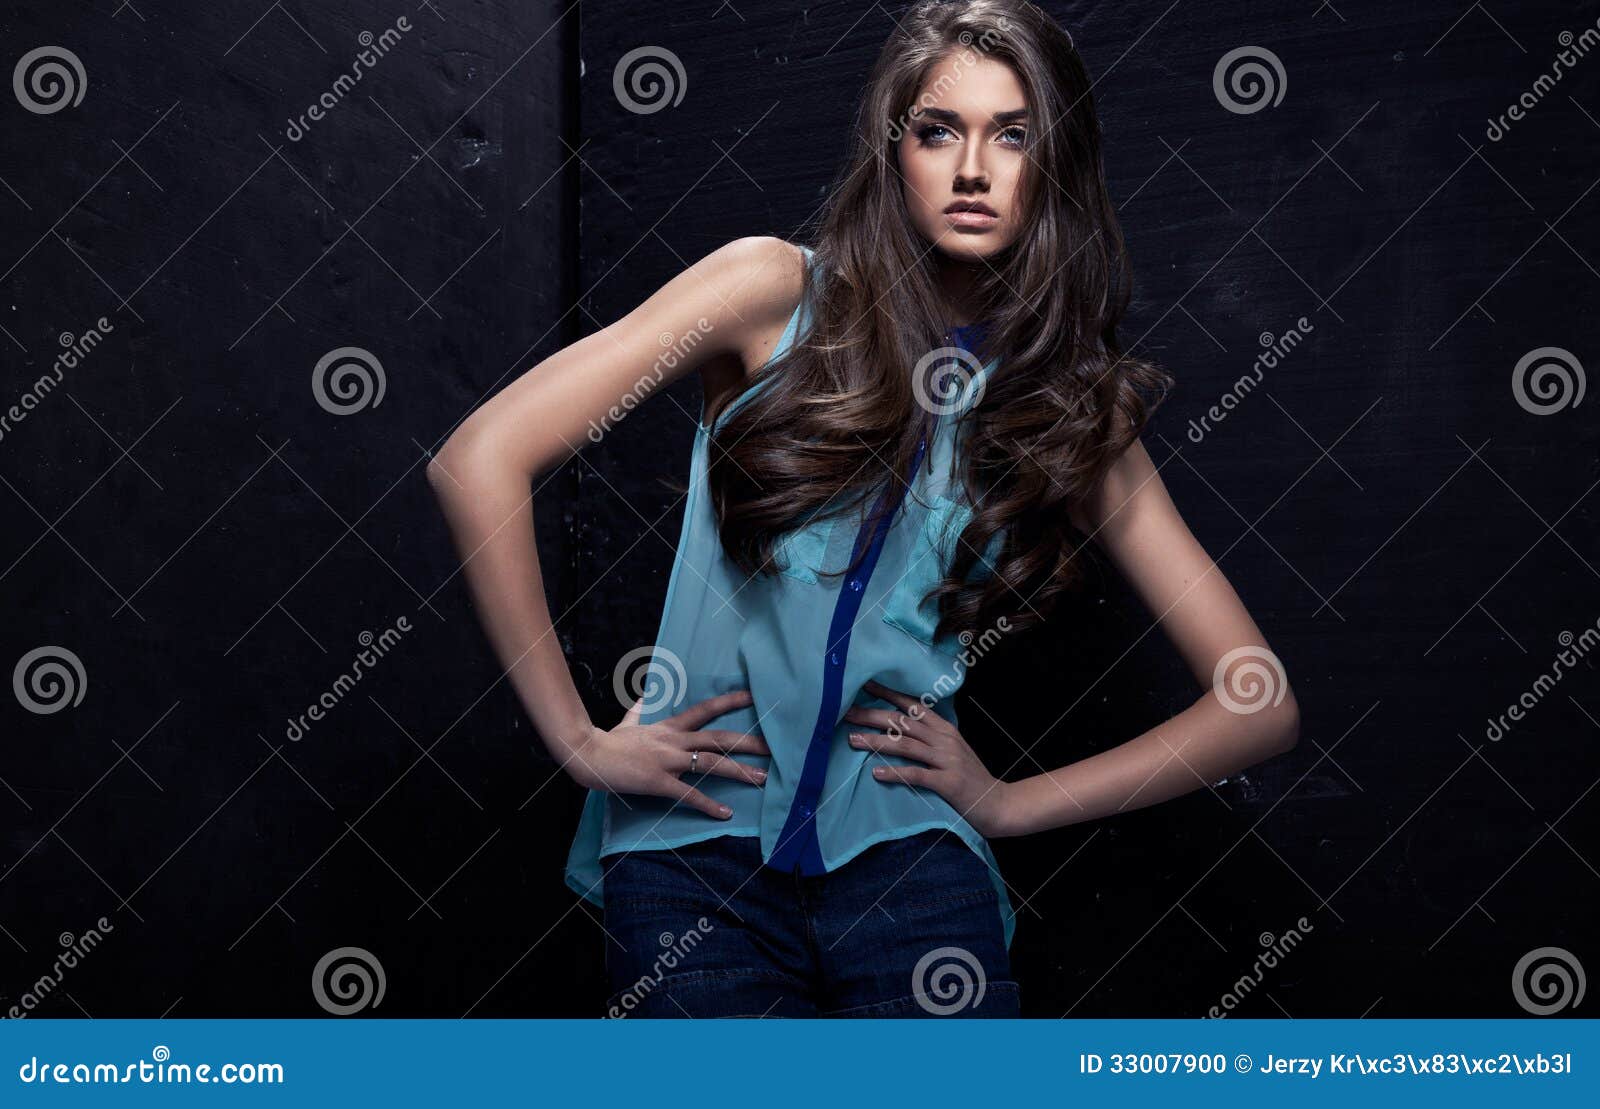  - young-fashion-woman-attractive-posing-33007900